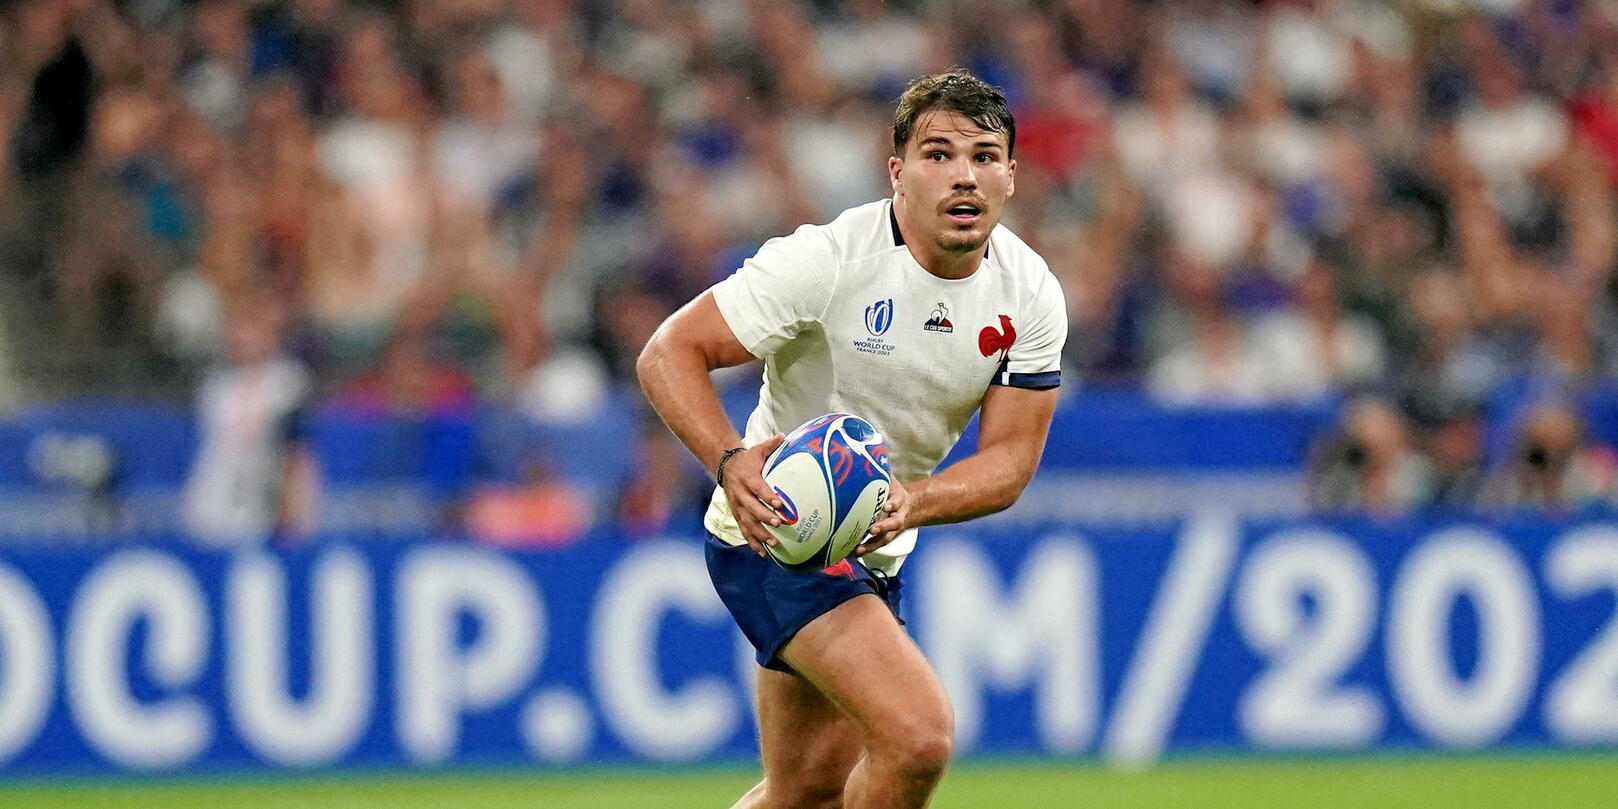 Antoine Dupont joins the XV of France group